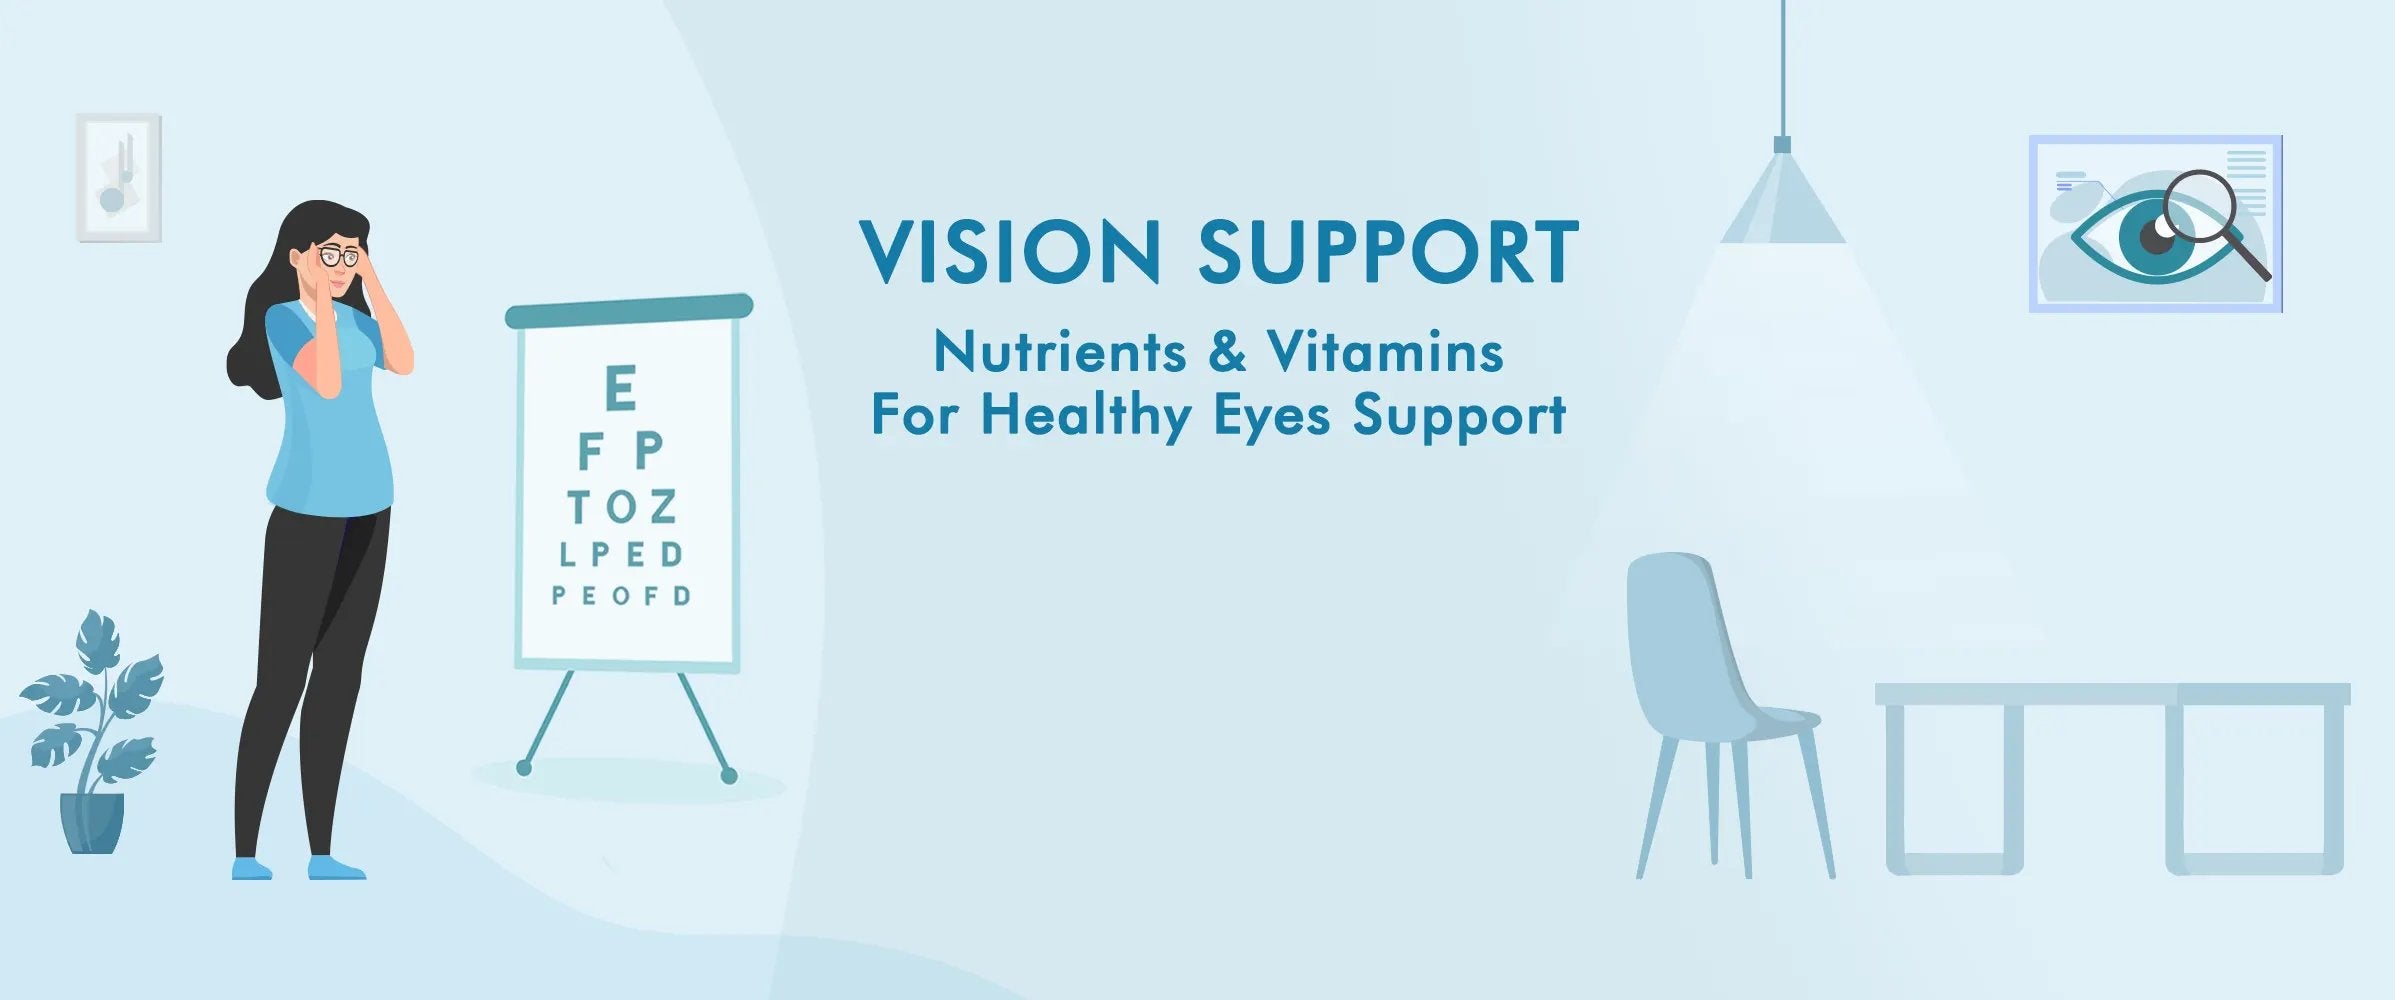 Vision Health Supplements